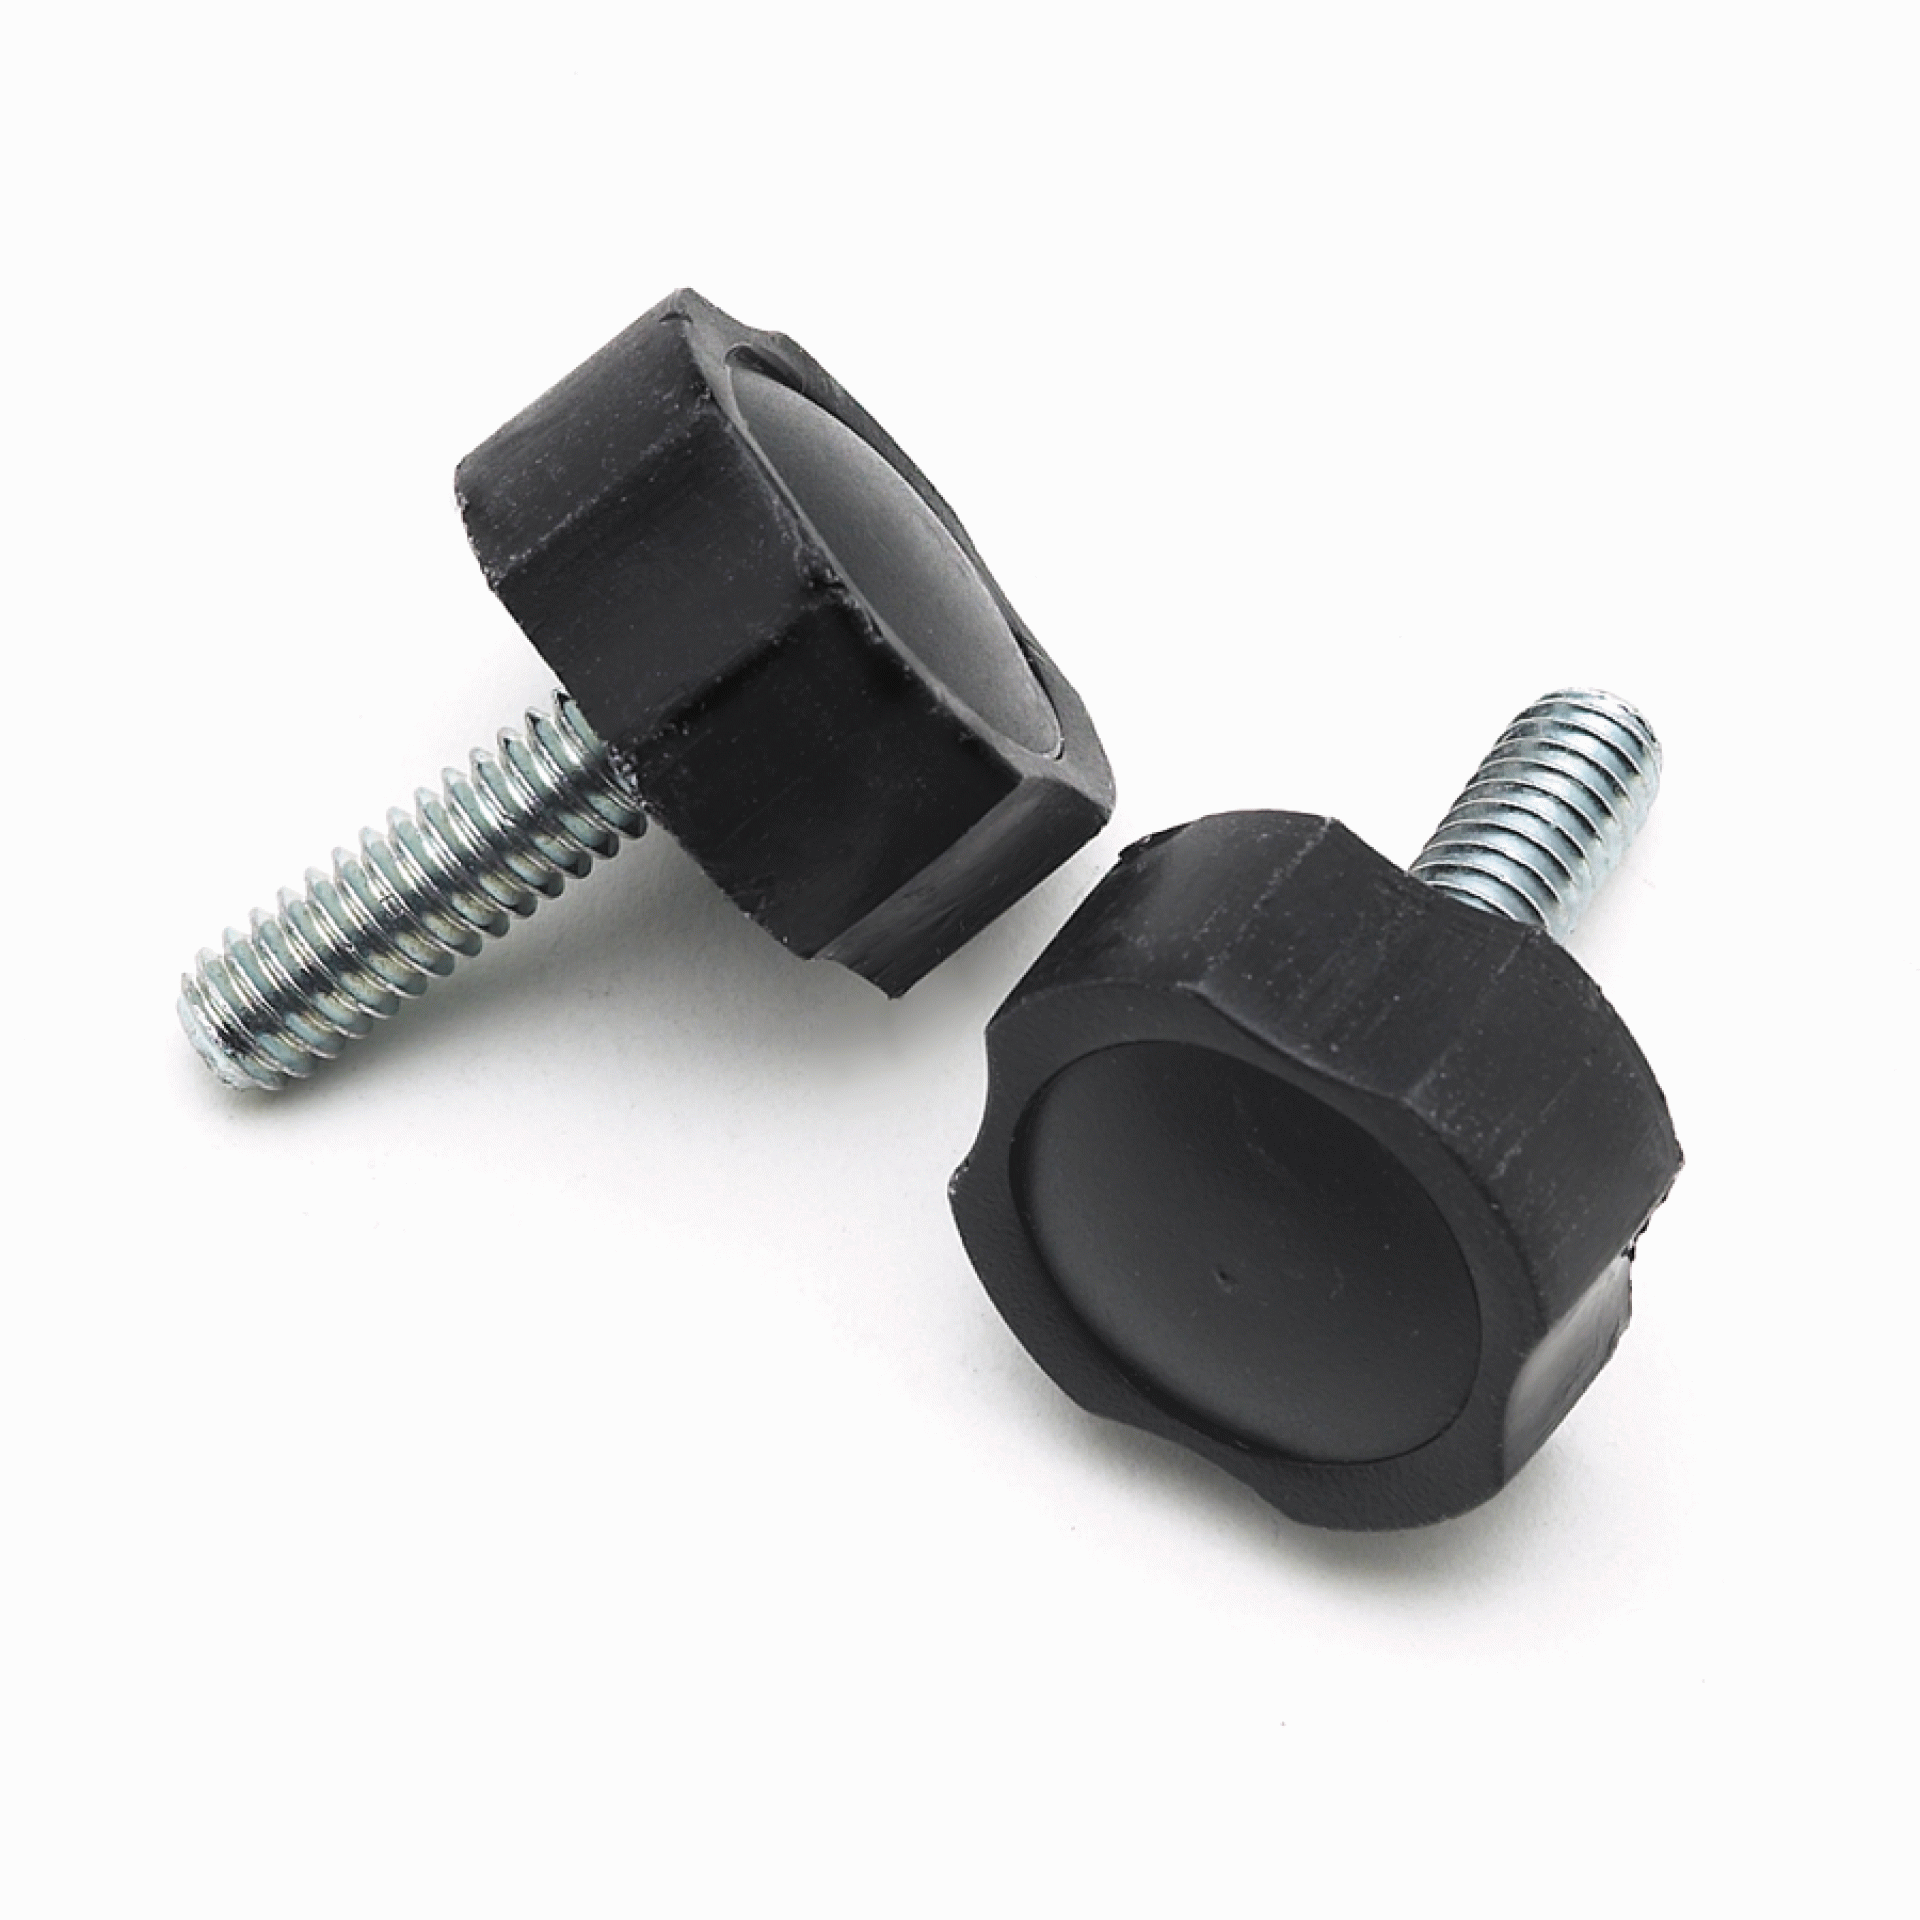 CAREFREE OF COLORADO | 901010-MP | LOCKING KNOB (2) - FOR ALL CENTER RAFTERS